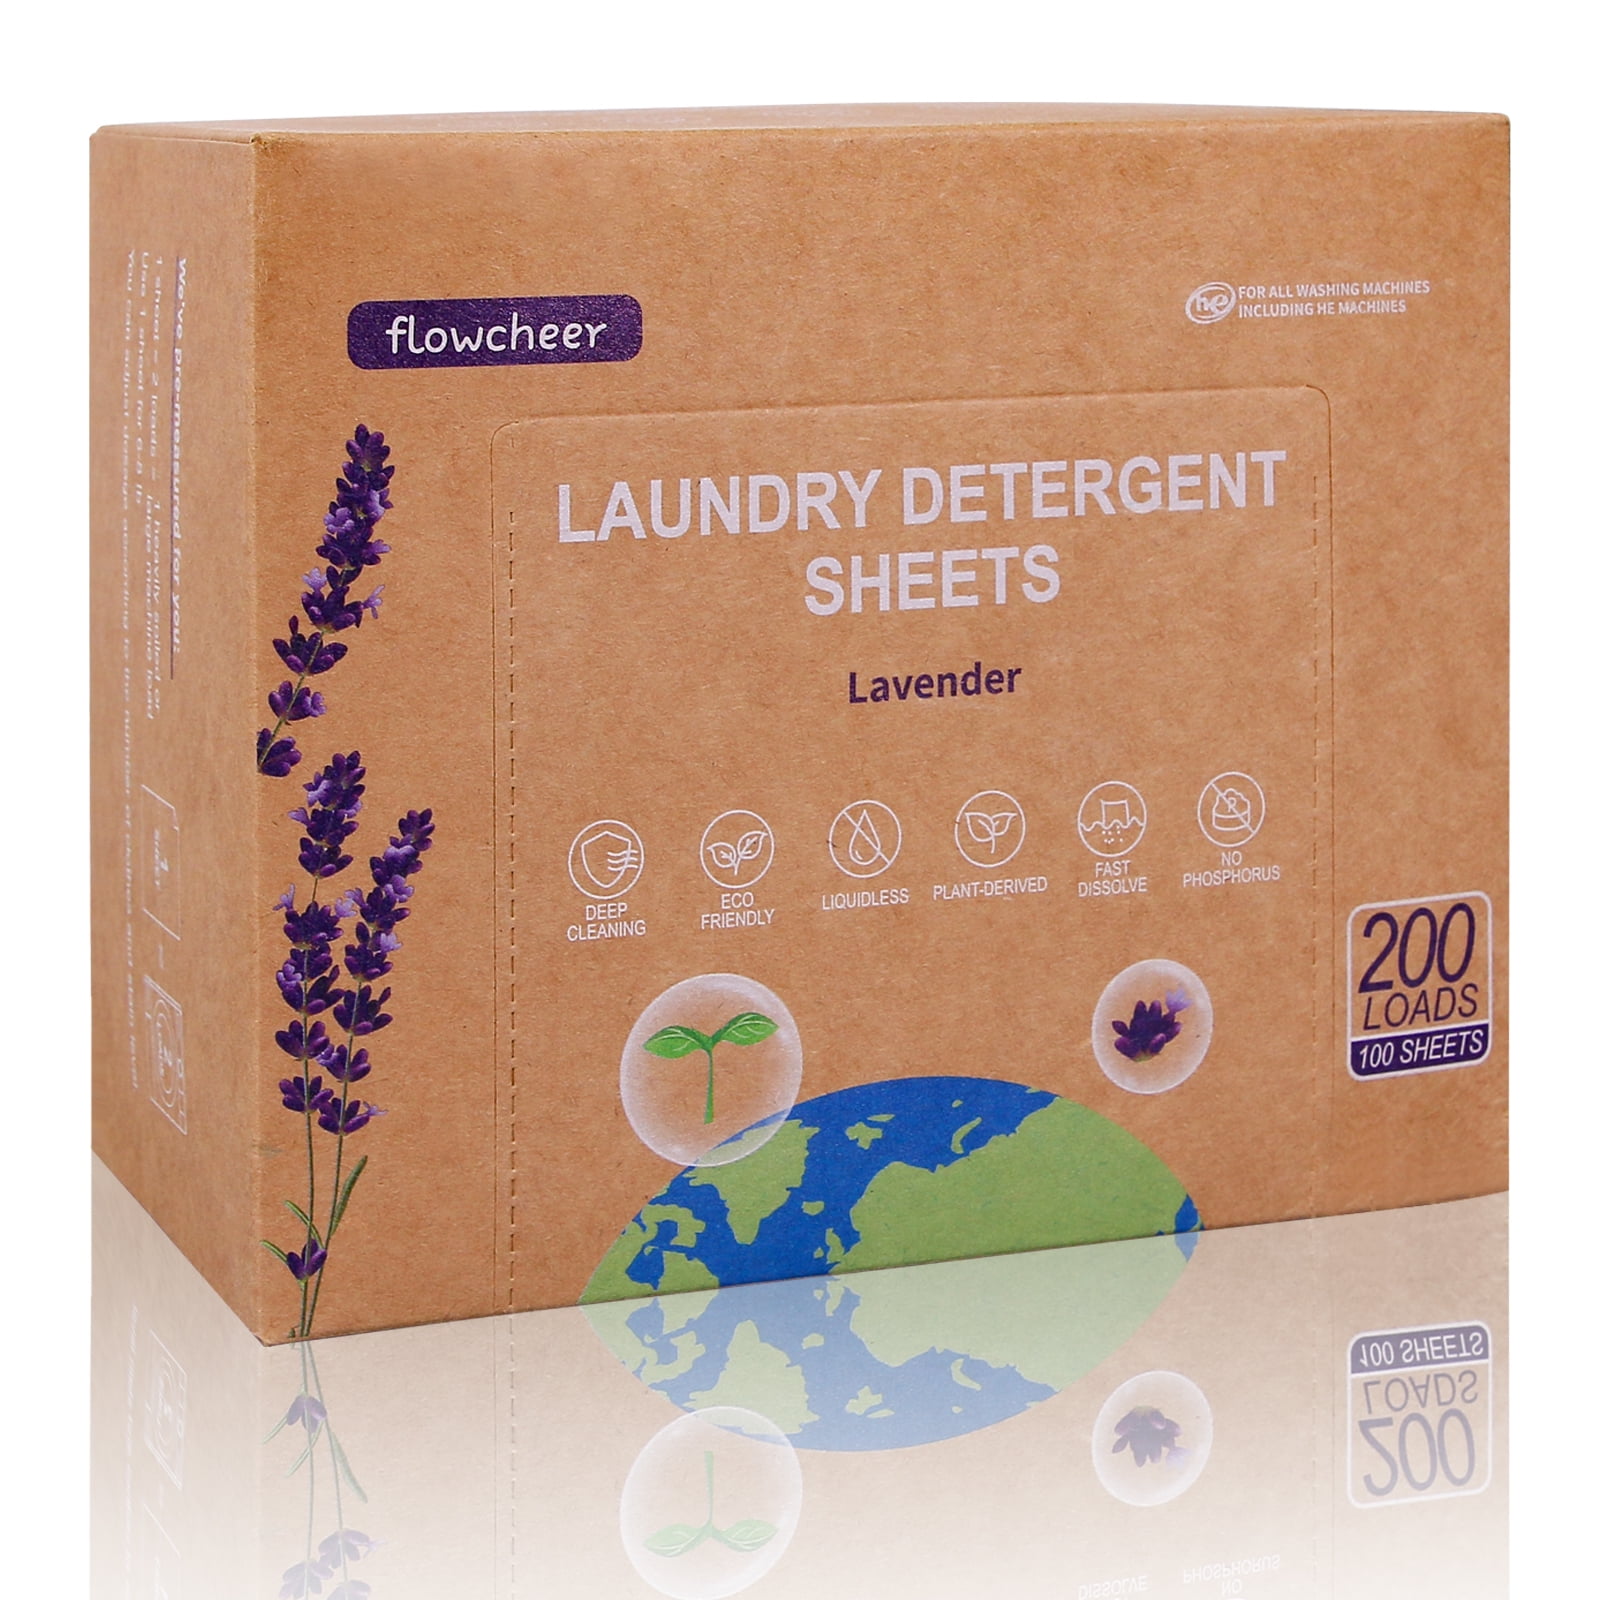 Flowcheer Laundry Detergent Sheets, 100 Pcs (Up To 200 Loads), Lavender  Scent, Eco-Friendly Washer Sheets, All Machine, Hand Wash Ok, Light Weight